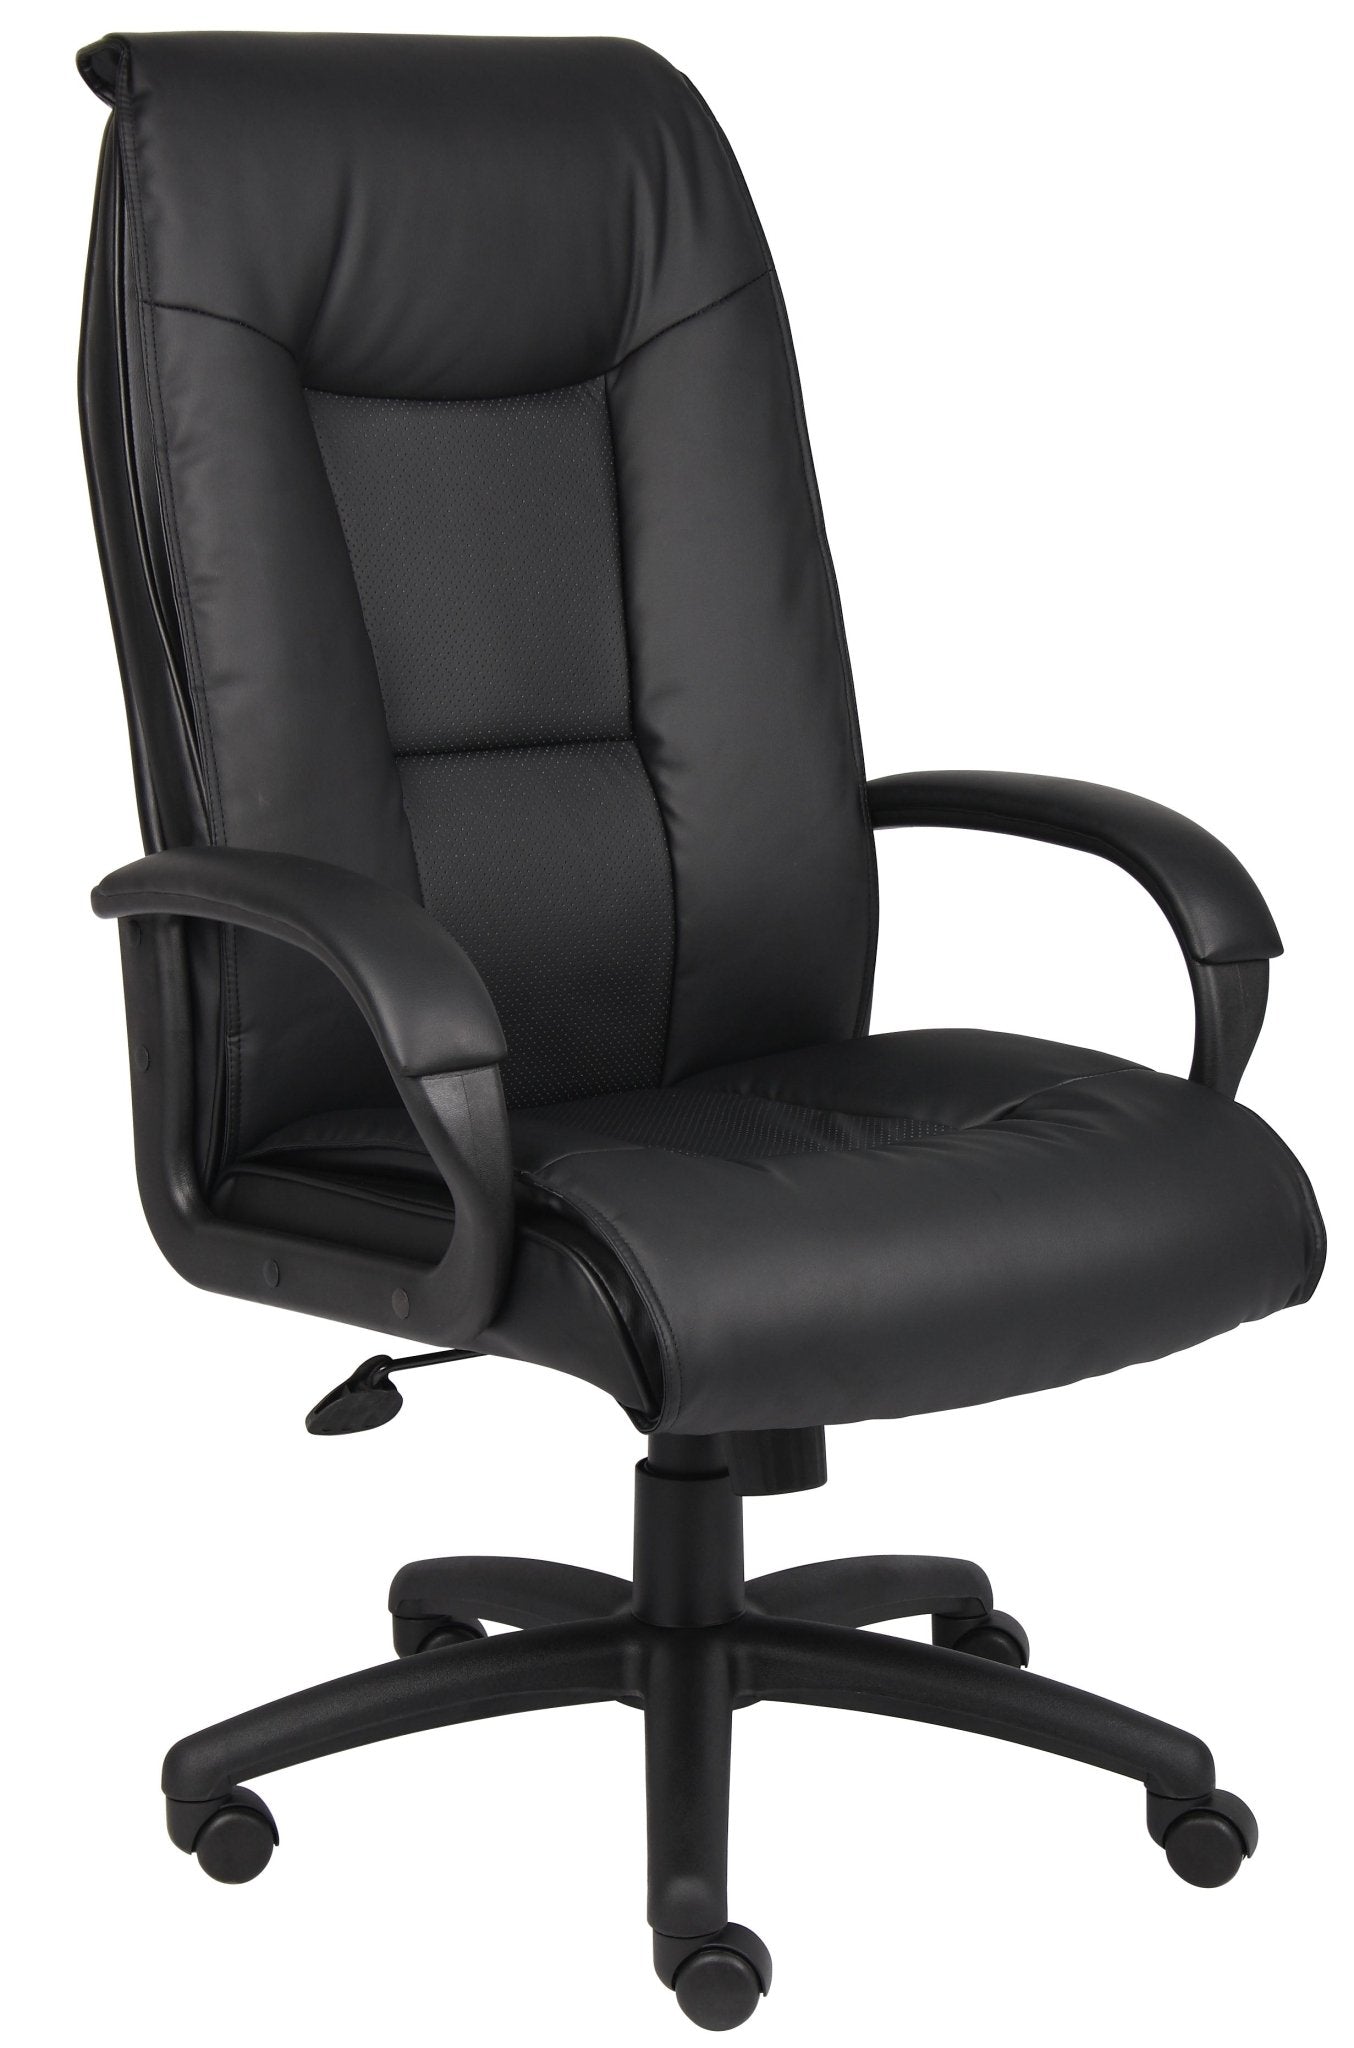 Boss LeatherPlus High - Back Executive Chair with Padded Loop Arms and Pillow - Top Cushions, Black (B7601) - SchoolOutlet